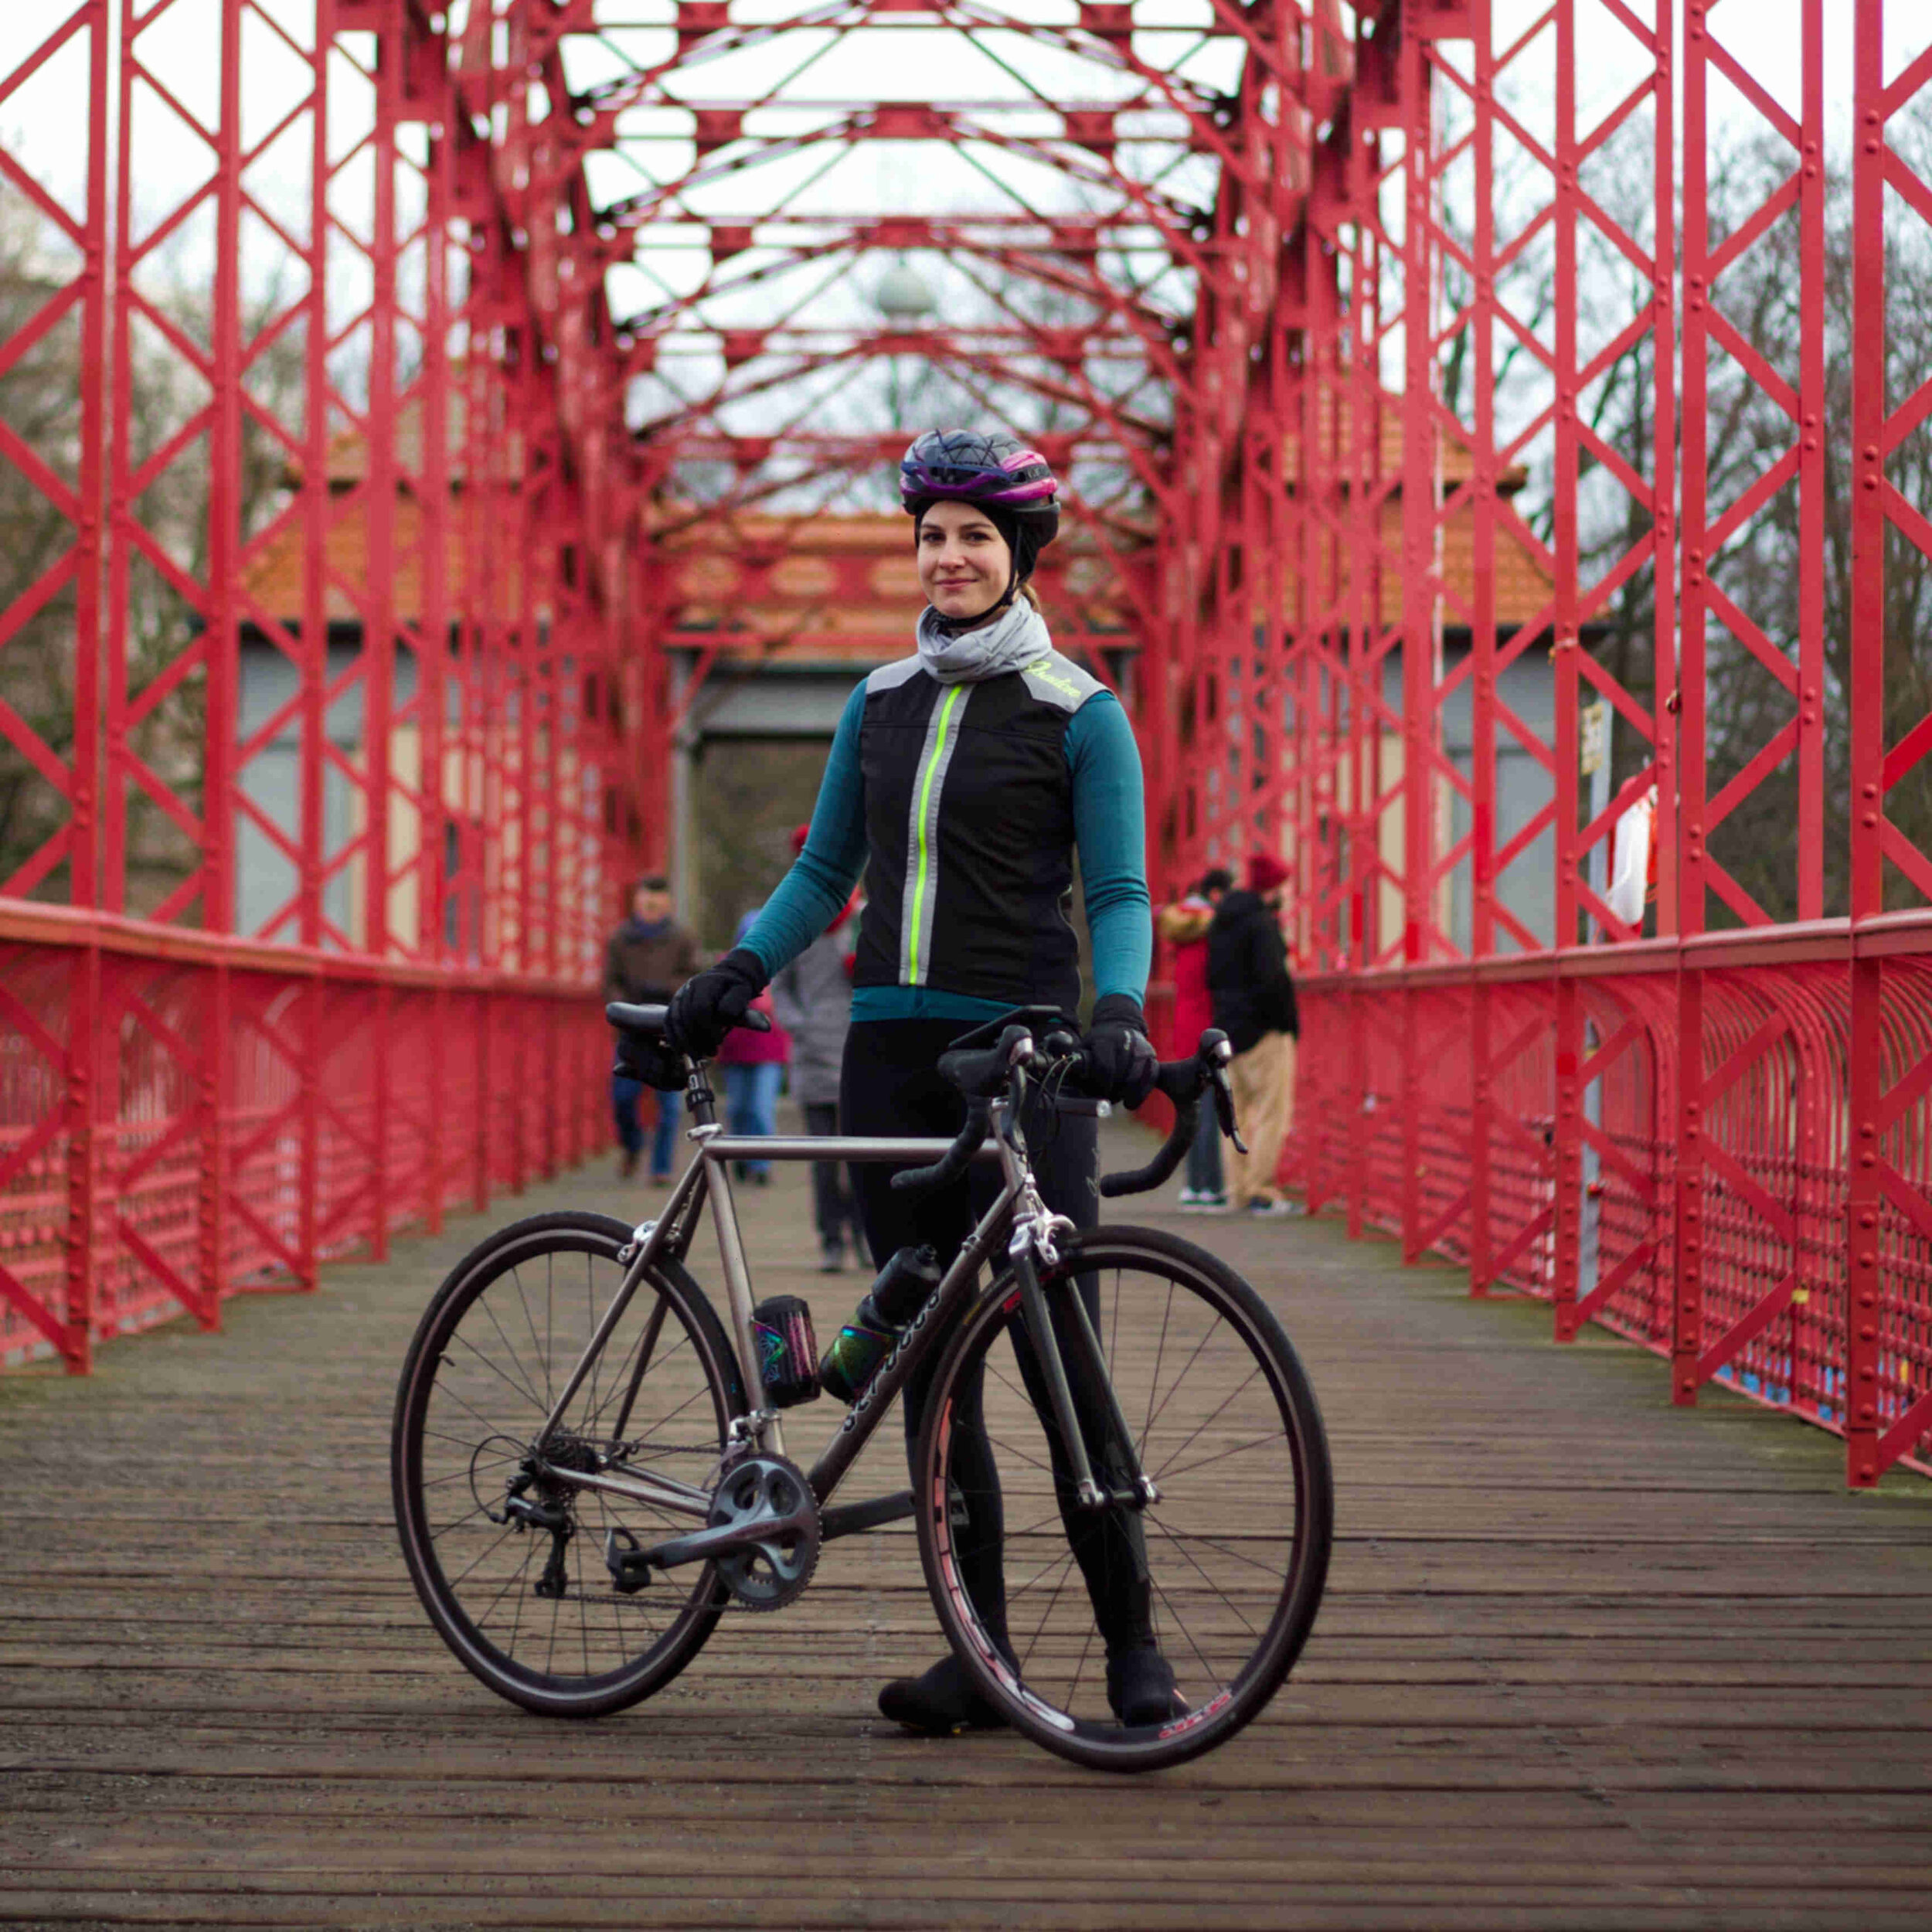 High quality winter cycling clothes and affordable alternatives — Aline  Goes Cycling